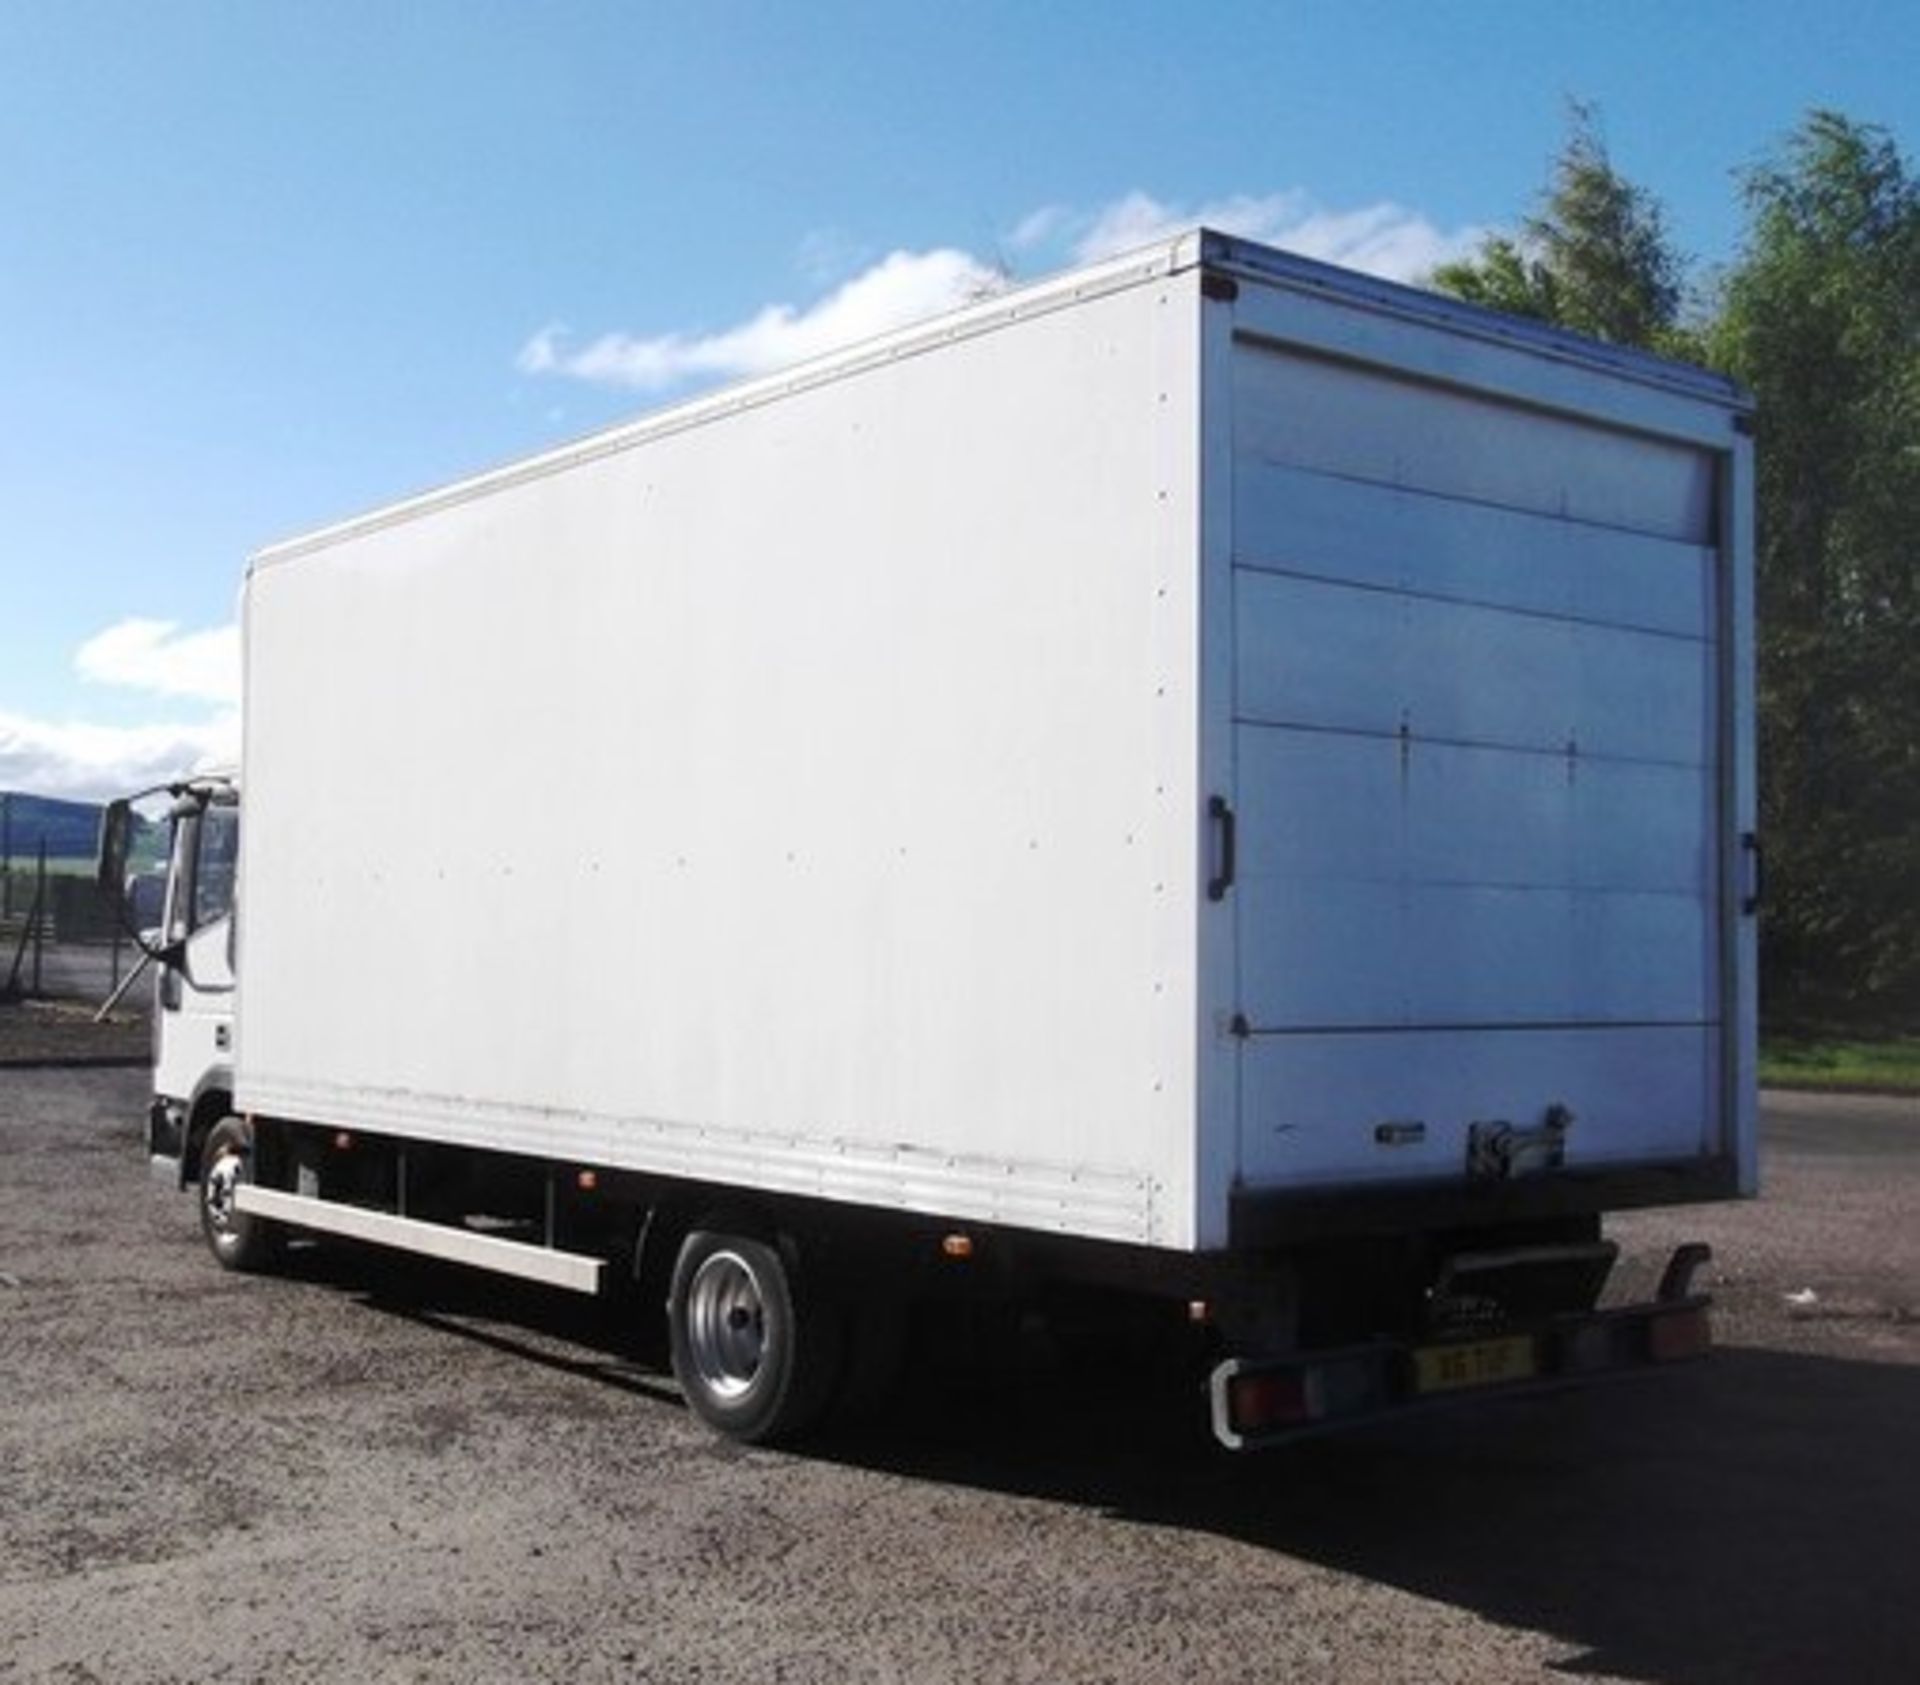 IVECO-FORD CARGO TECTOR - 3920cc
Body: 2 Dr Van
Color: White
First Reg: 05/03/2004
Doors: 2
MOT: - Image 16 of 20